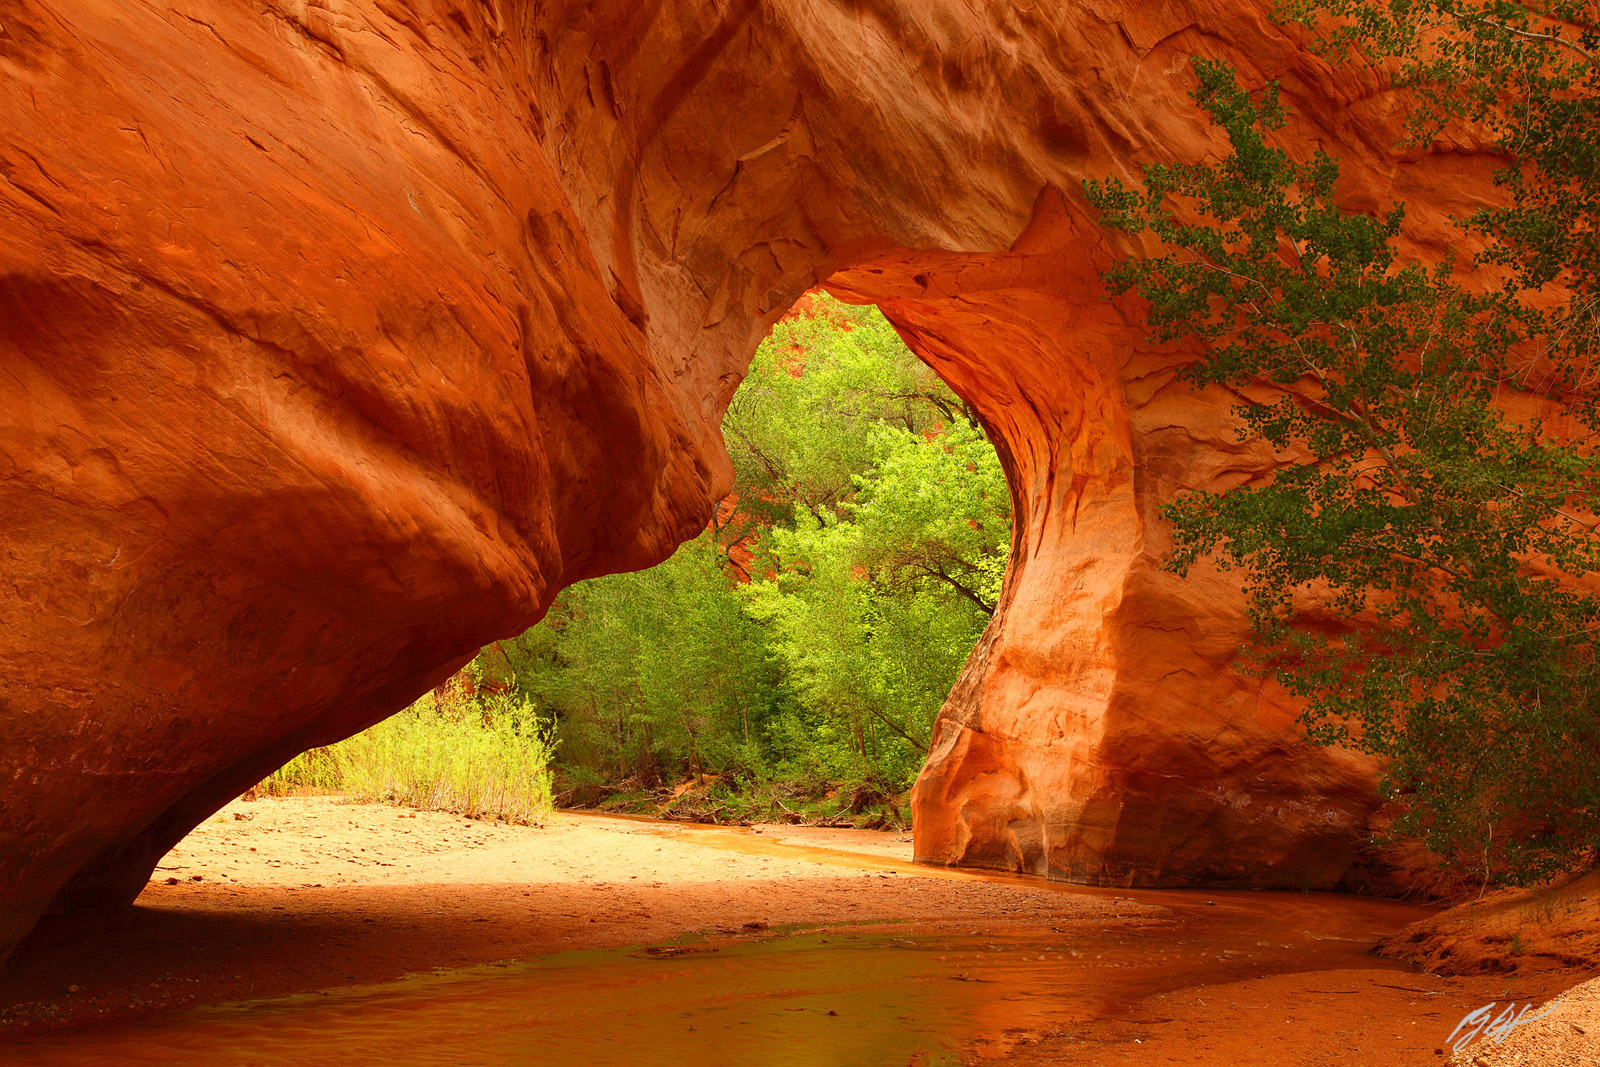 Coyote Natural Bridge in Coyote Gulch in the Grand Staircase-Escalante National Monument in Utah